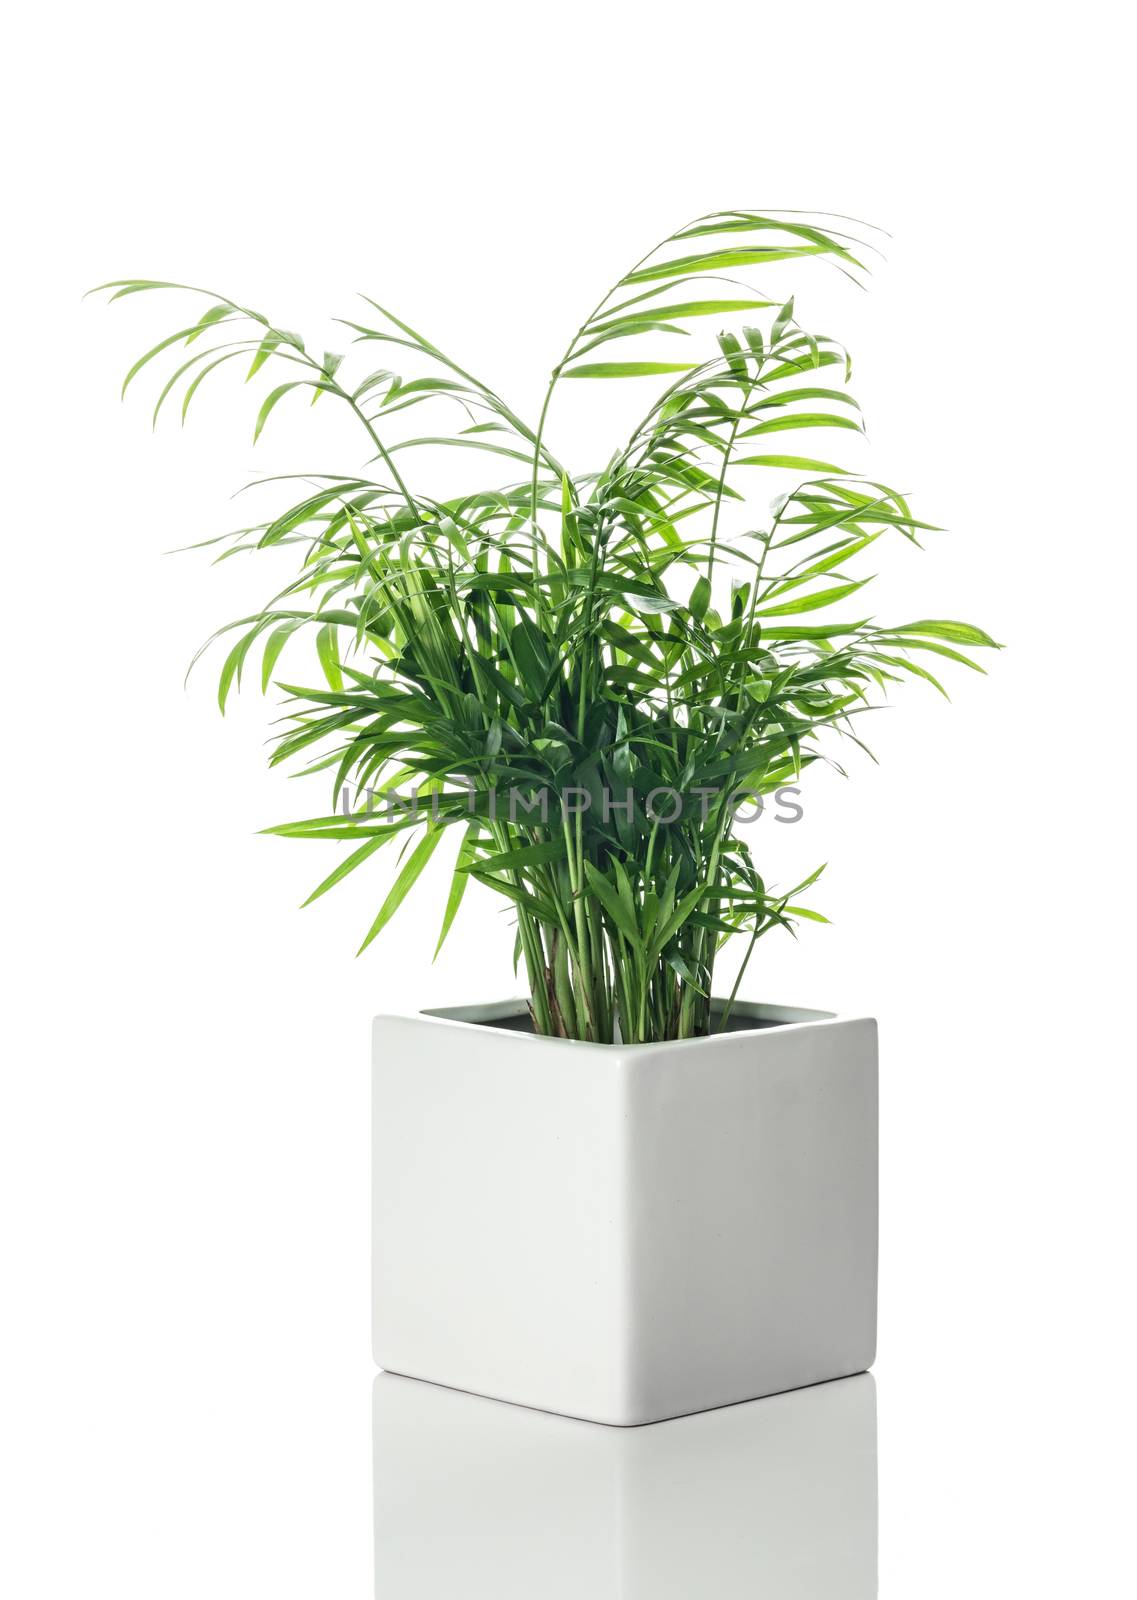 Beautiful Parlor palm in a white ceramic pot by anikasalsera